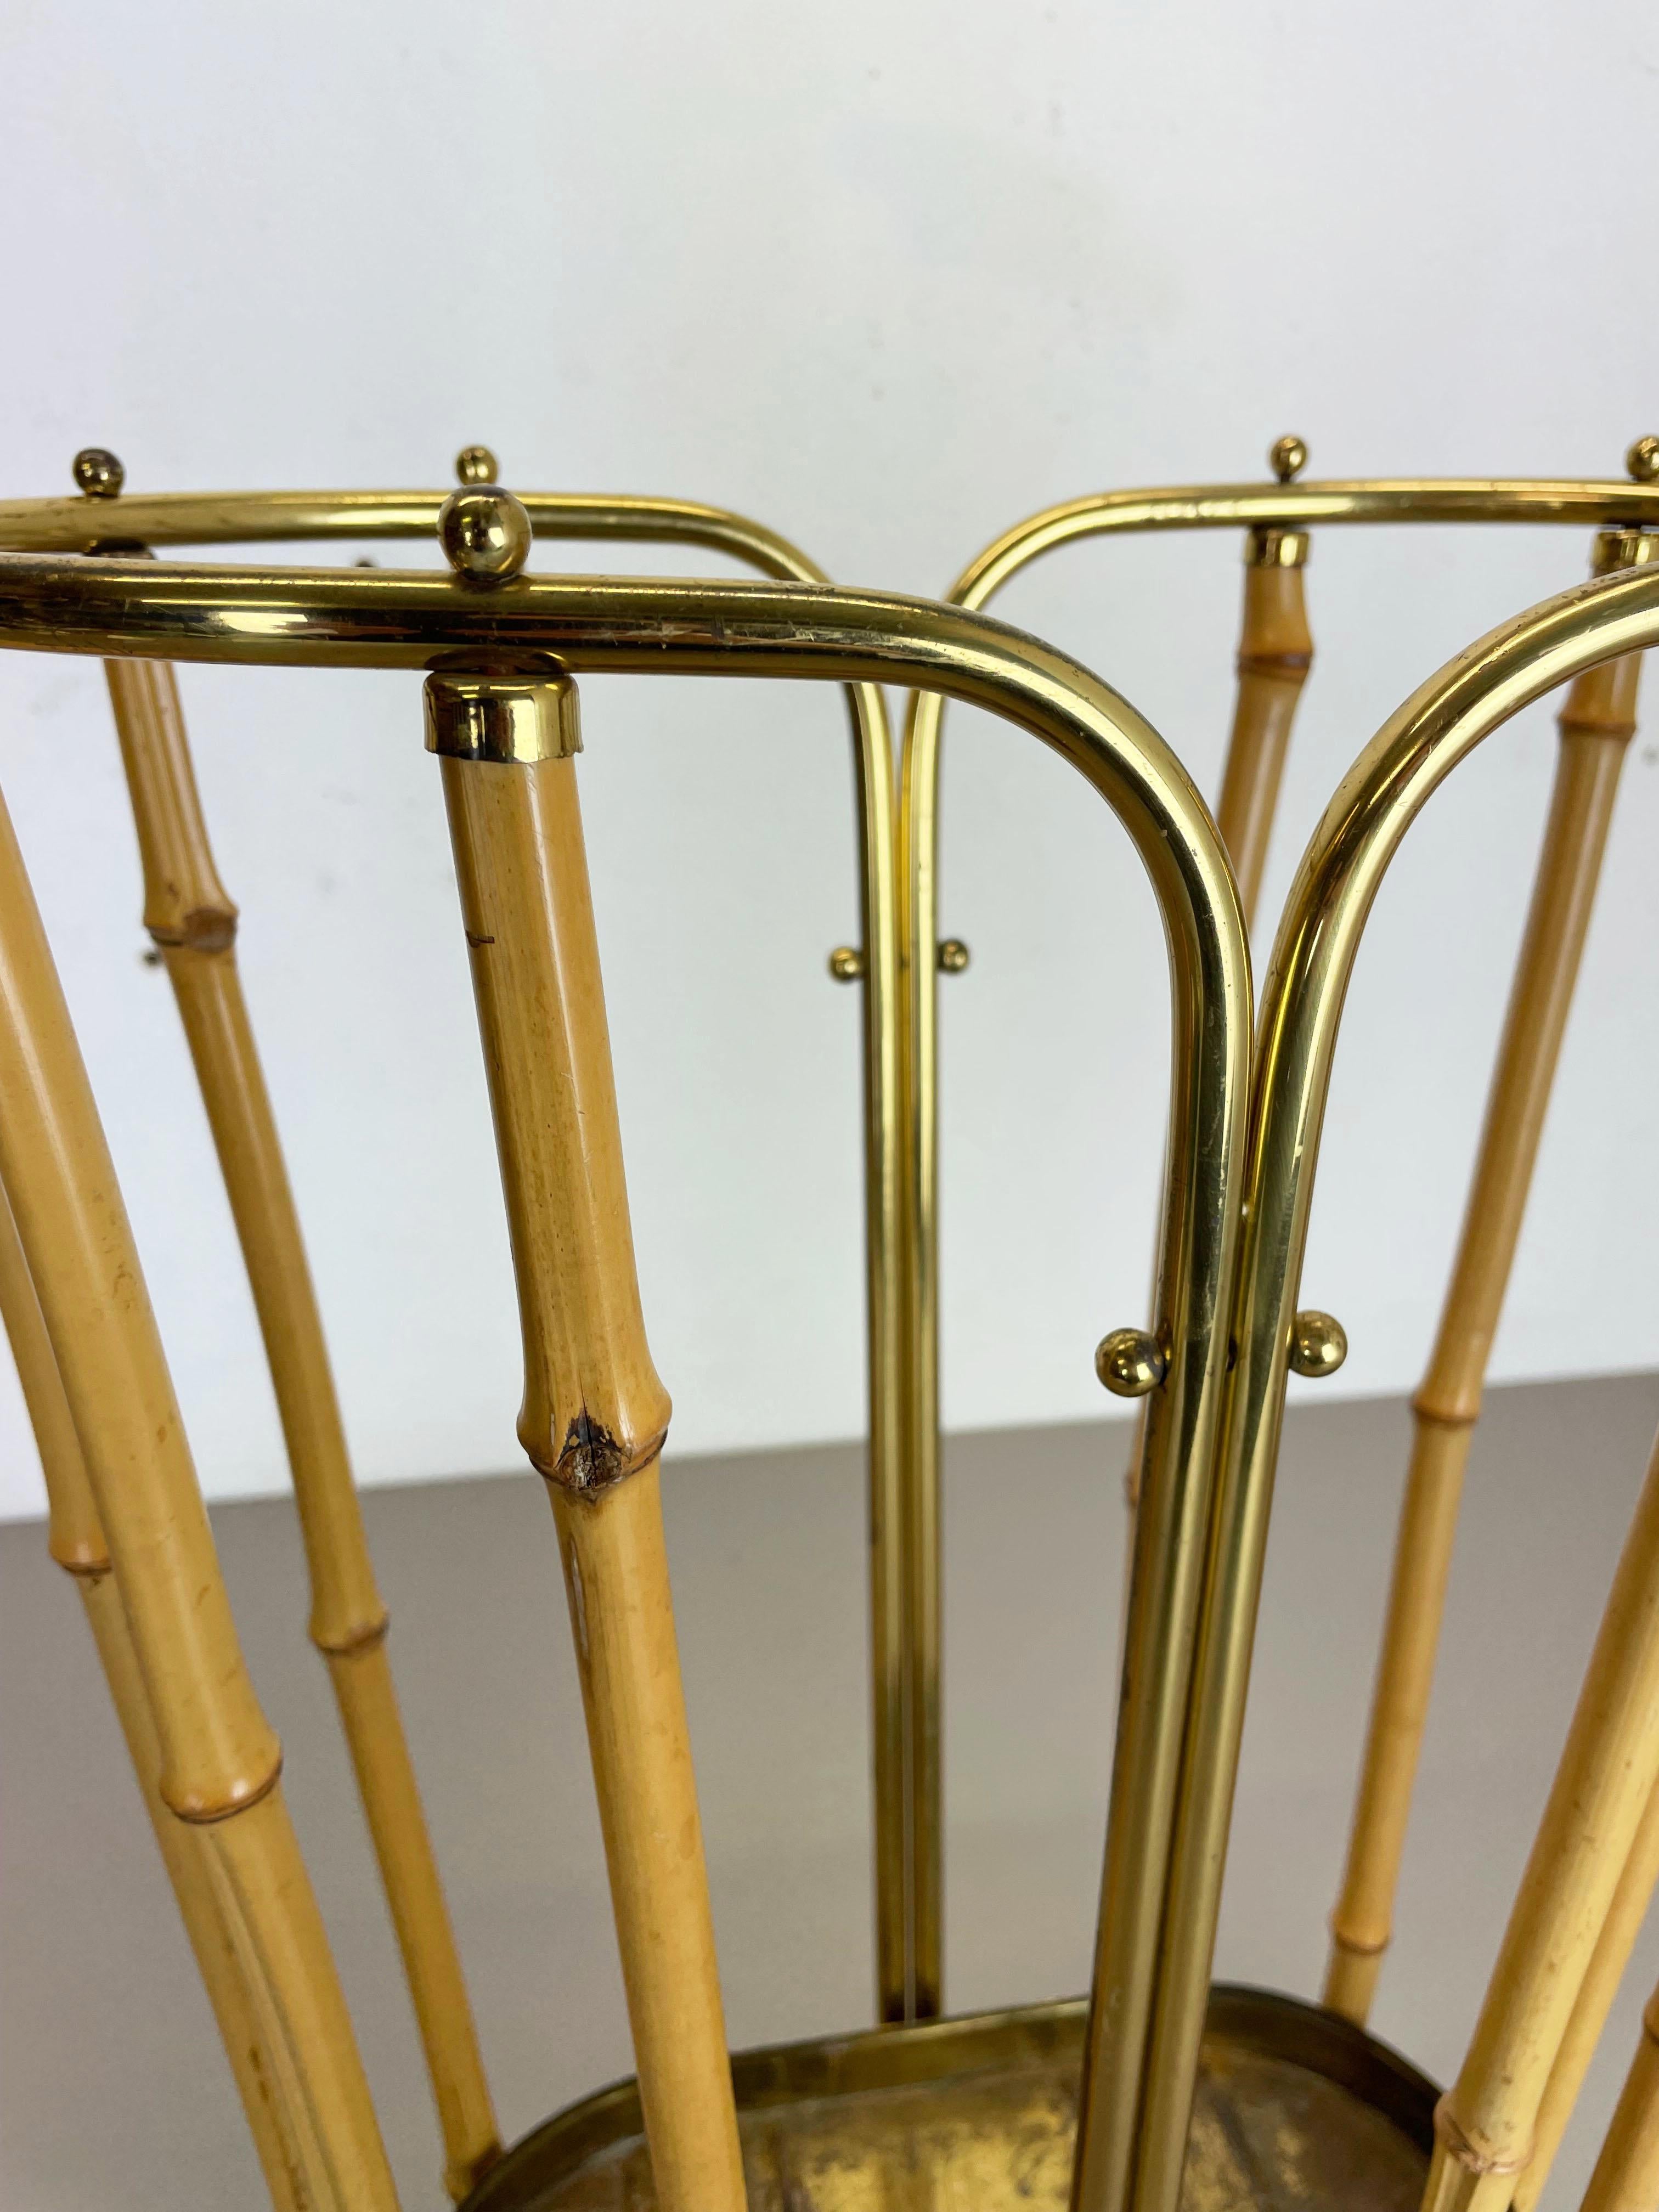 Hollywood Regency Auböck Style Brass Bamboo Umbrella Stand, Austria, 1950s For Sale 5